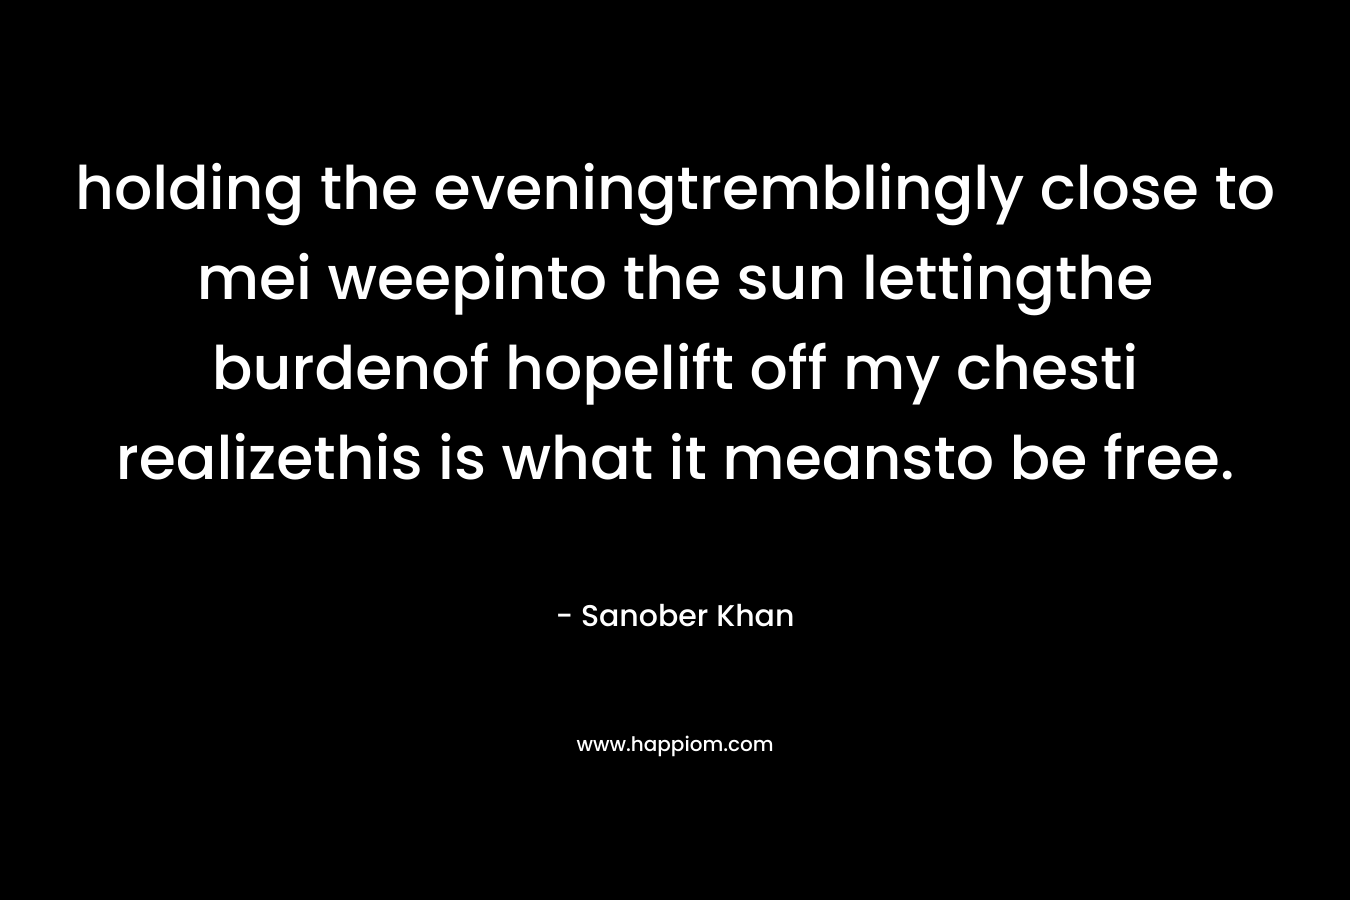 holding the eveningtremblingly close to mei weepinto the sun lettingthe burdenof hopelift off my chesti realizethis is what it meansto be free. – Sanober  Khan